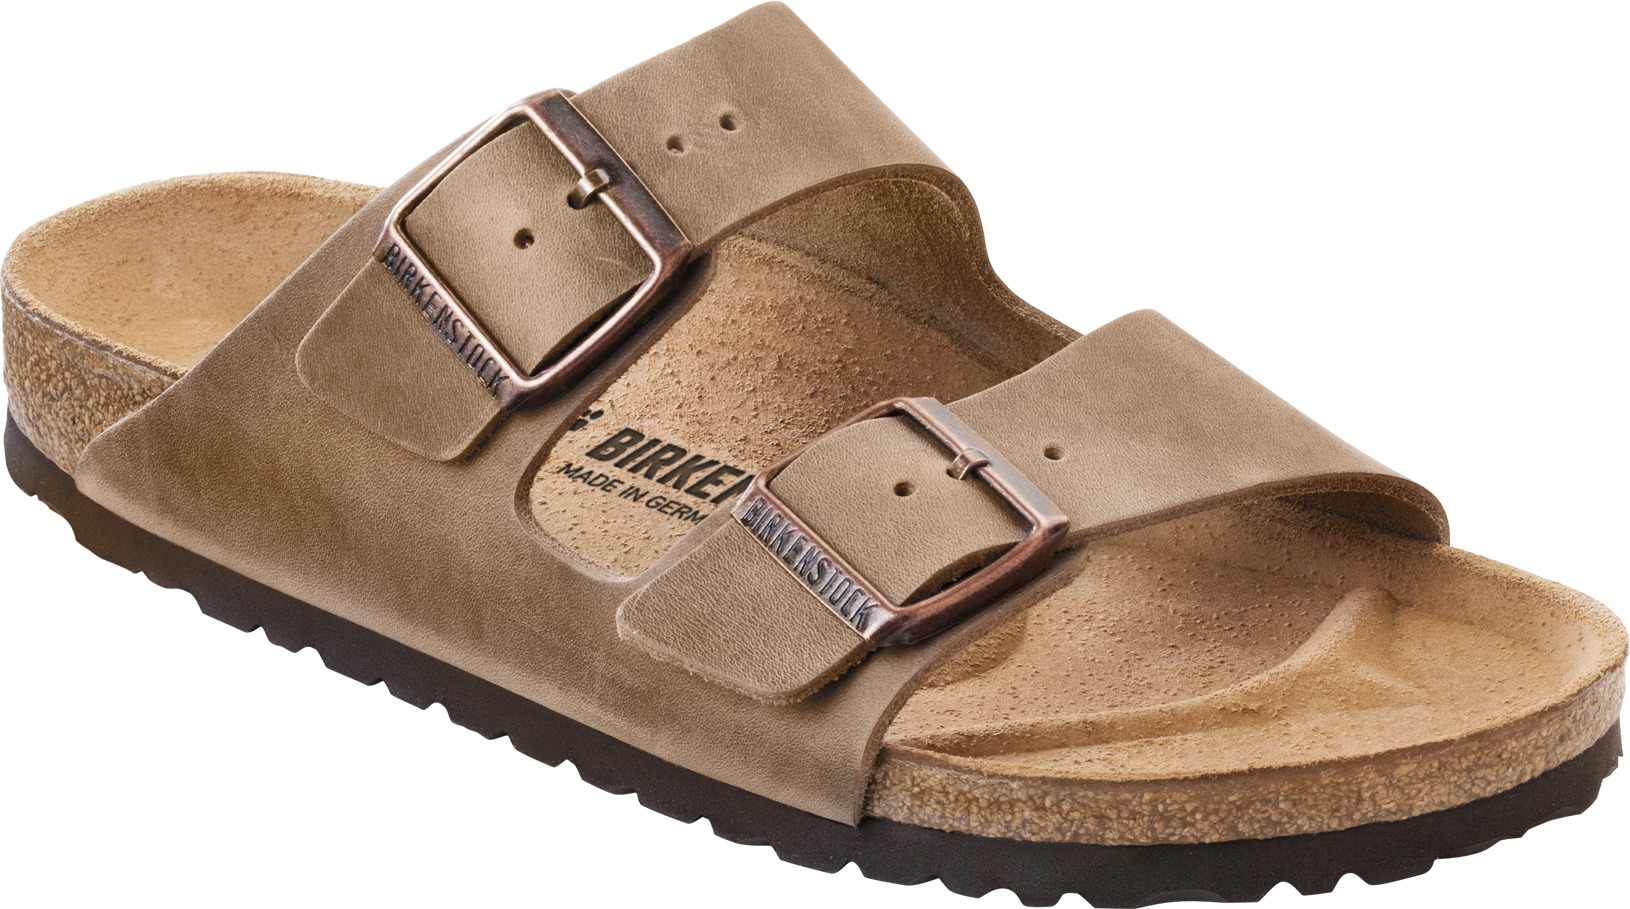 Birkenstock Arizona Oiled Ladies Narrow Tobacco Brown Leather Arch Support Buckle Sandals